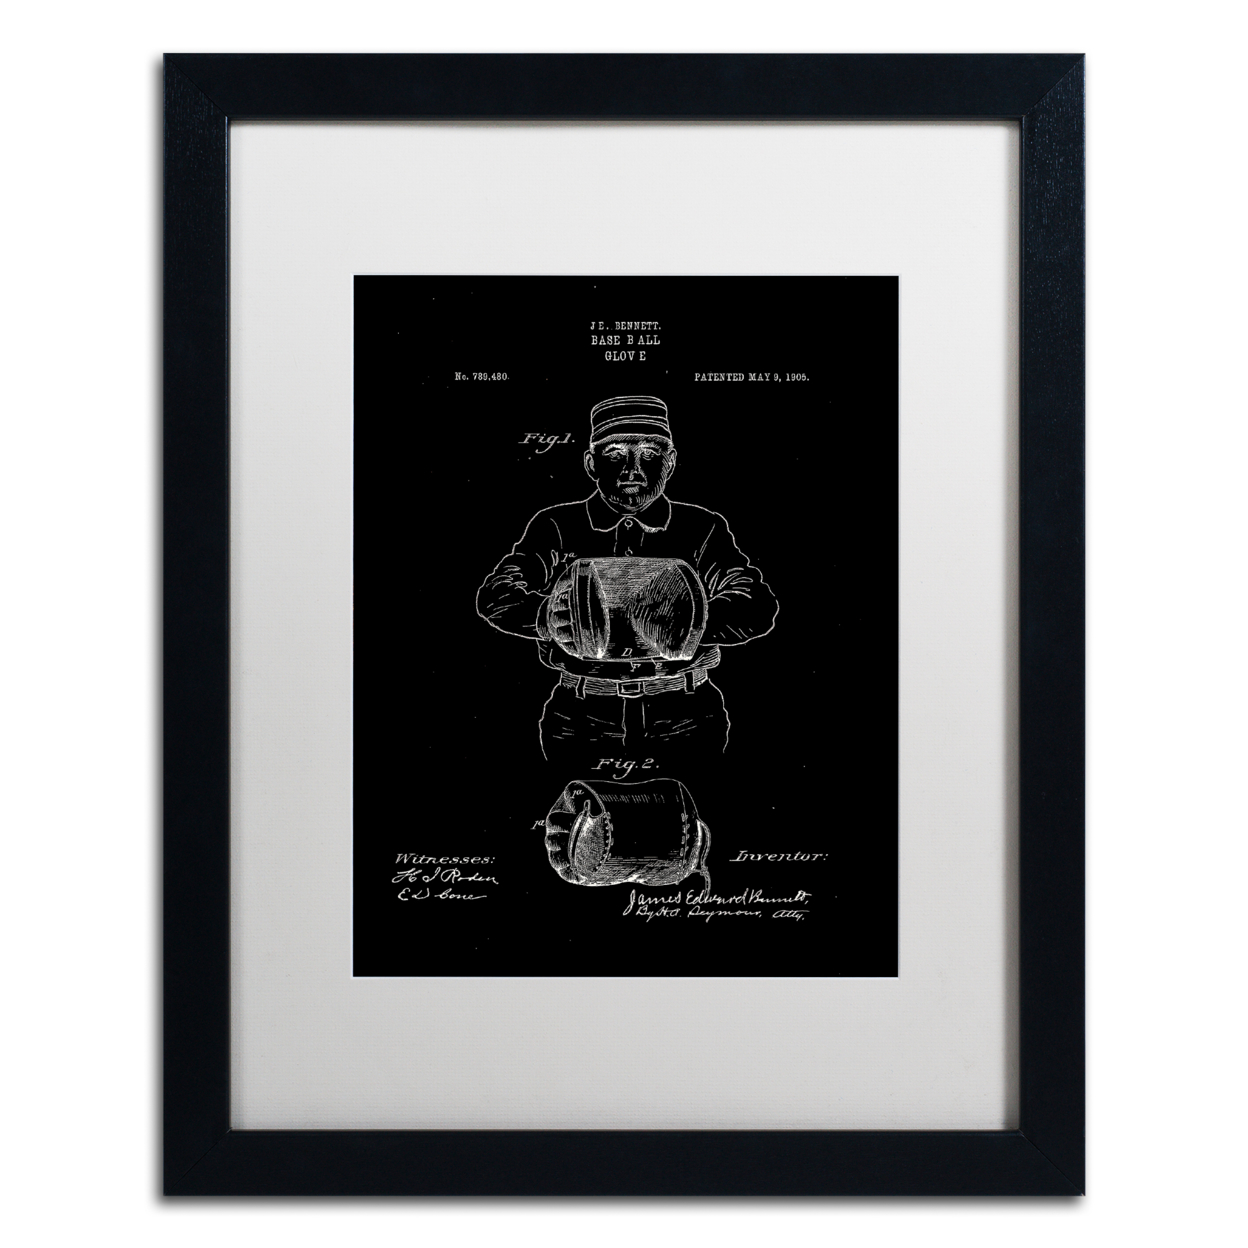 Claire Doherty 'Baseball Glove Patent 1905 Black' Black Wooden Framed Art 18 X 22 Inches